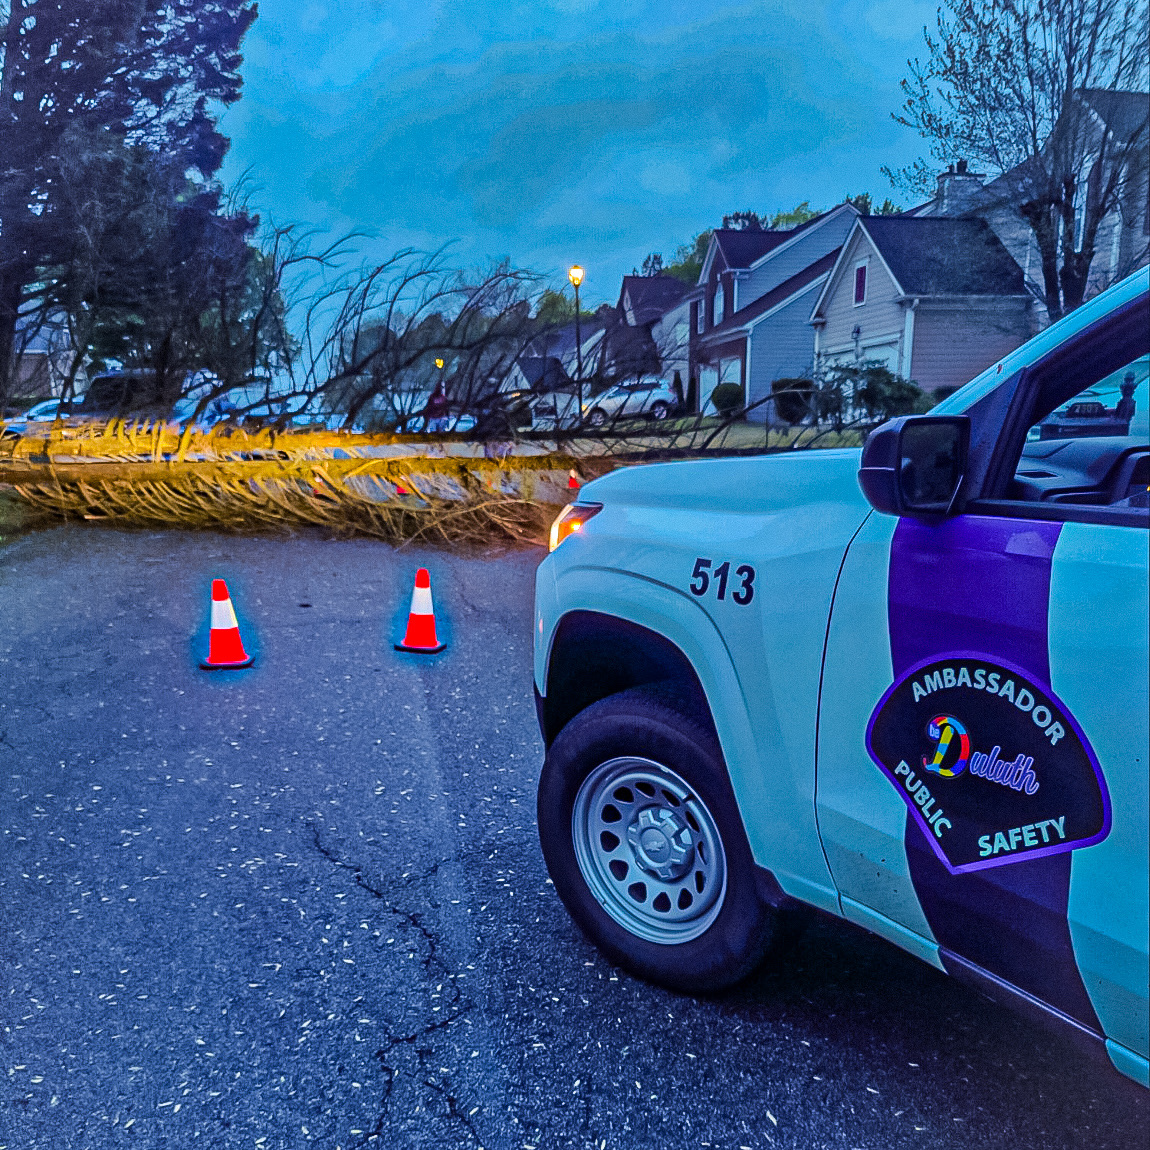 🚧 Road Closures Update 🚧

Due to the storms overnight, the following roads are currently closed:

1. Craigwood Drive at Richwood Drive
2. Hiawassee Drive

Stay tuned for further updates as roads are cleared or additional closures are reported. Stay safe! #RoadClosures